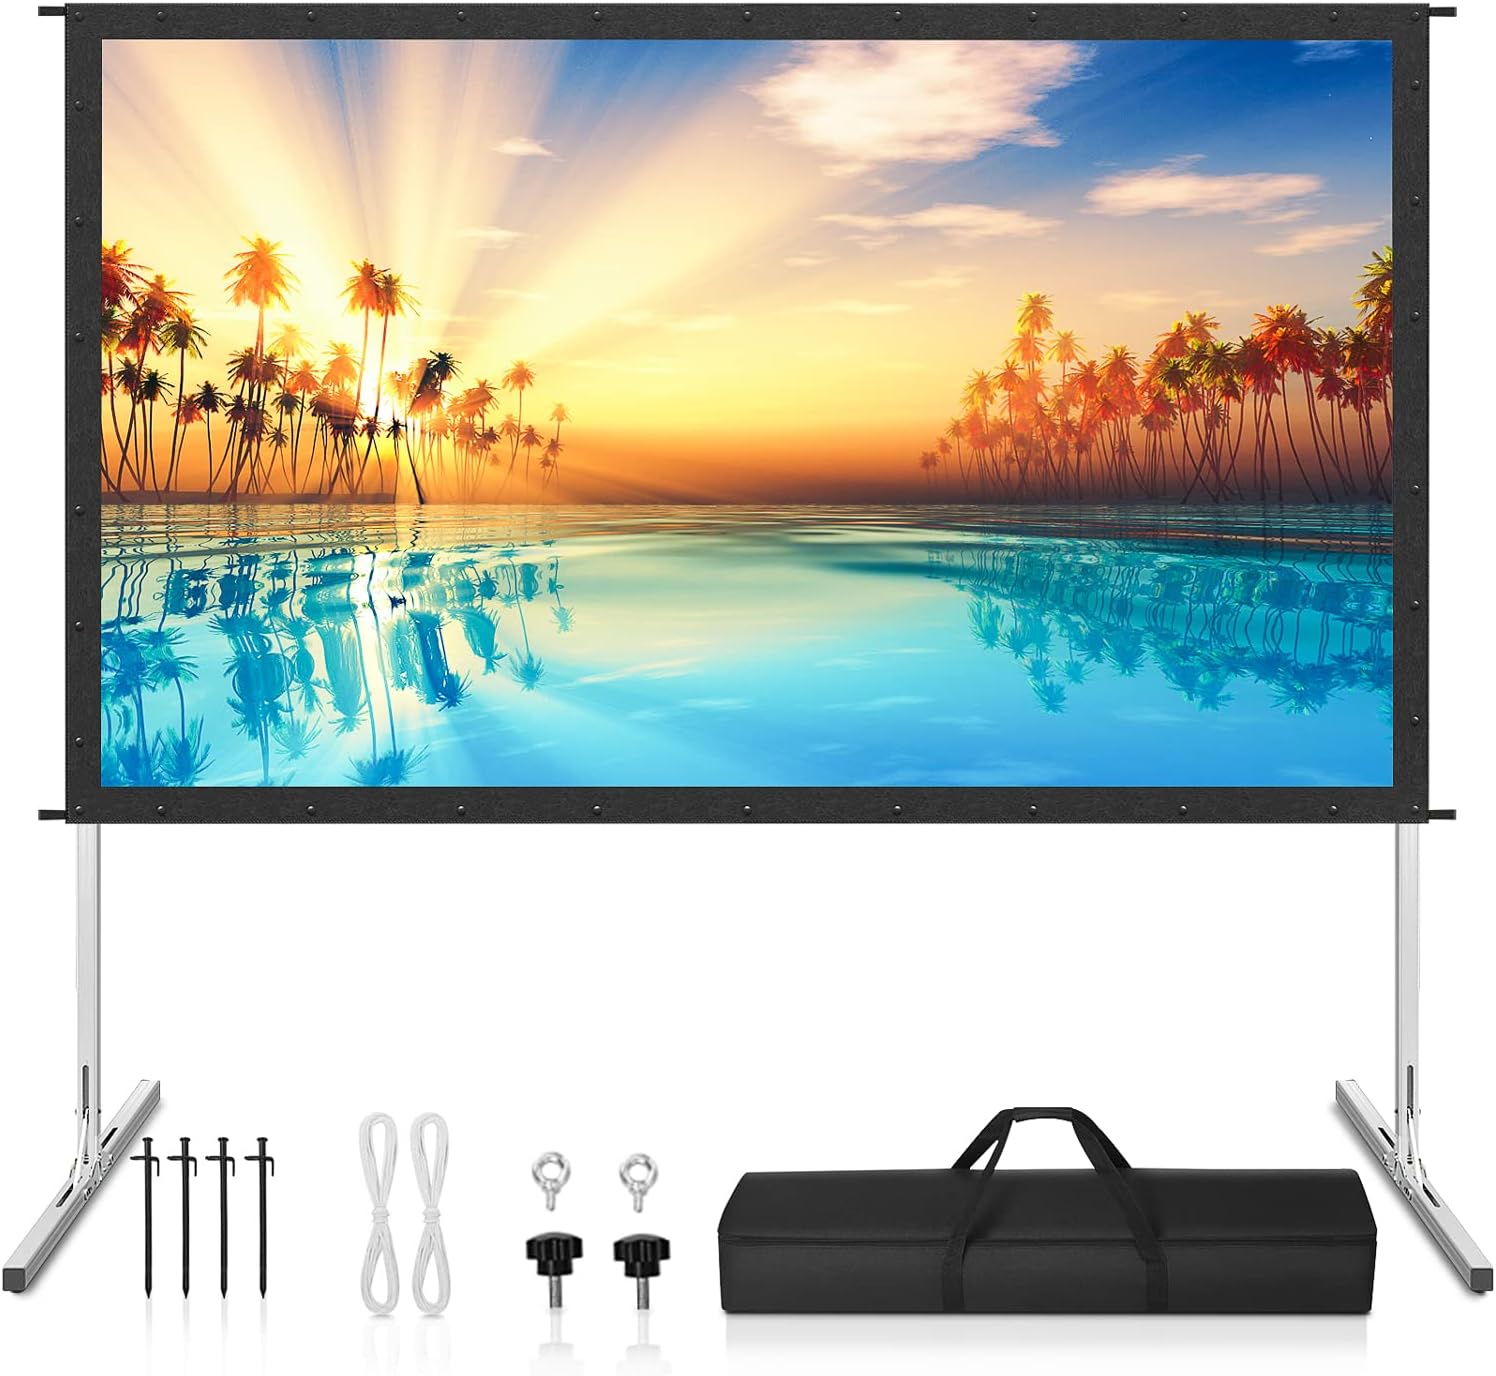 Where To Buy A Projector Screen